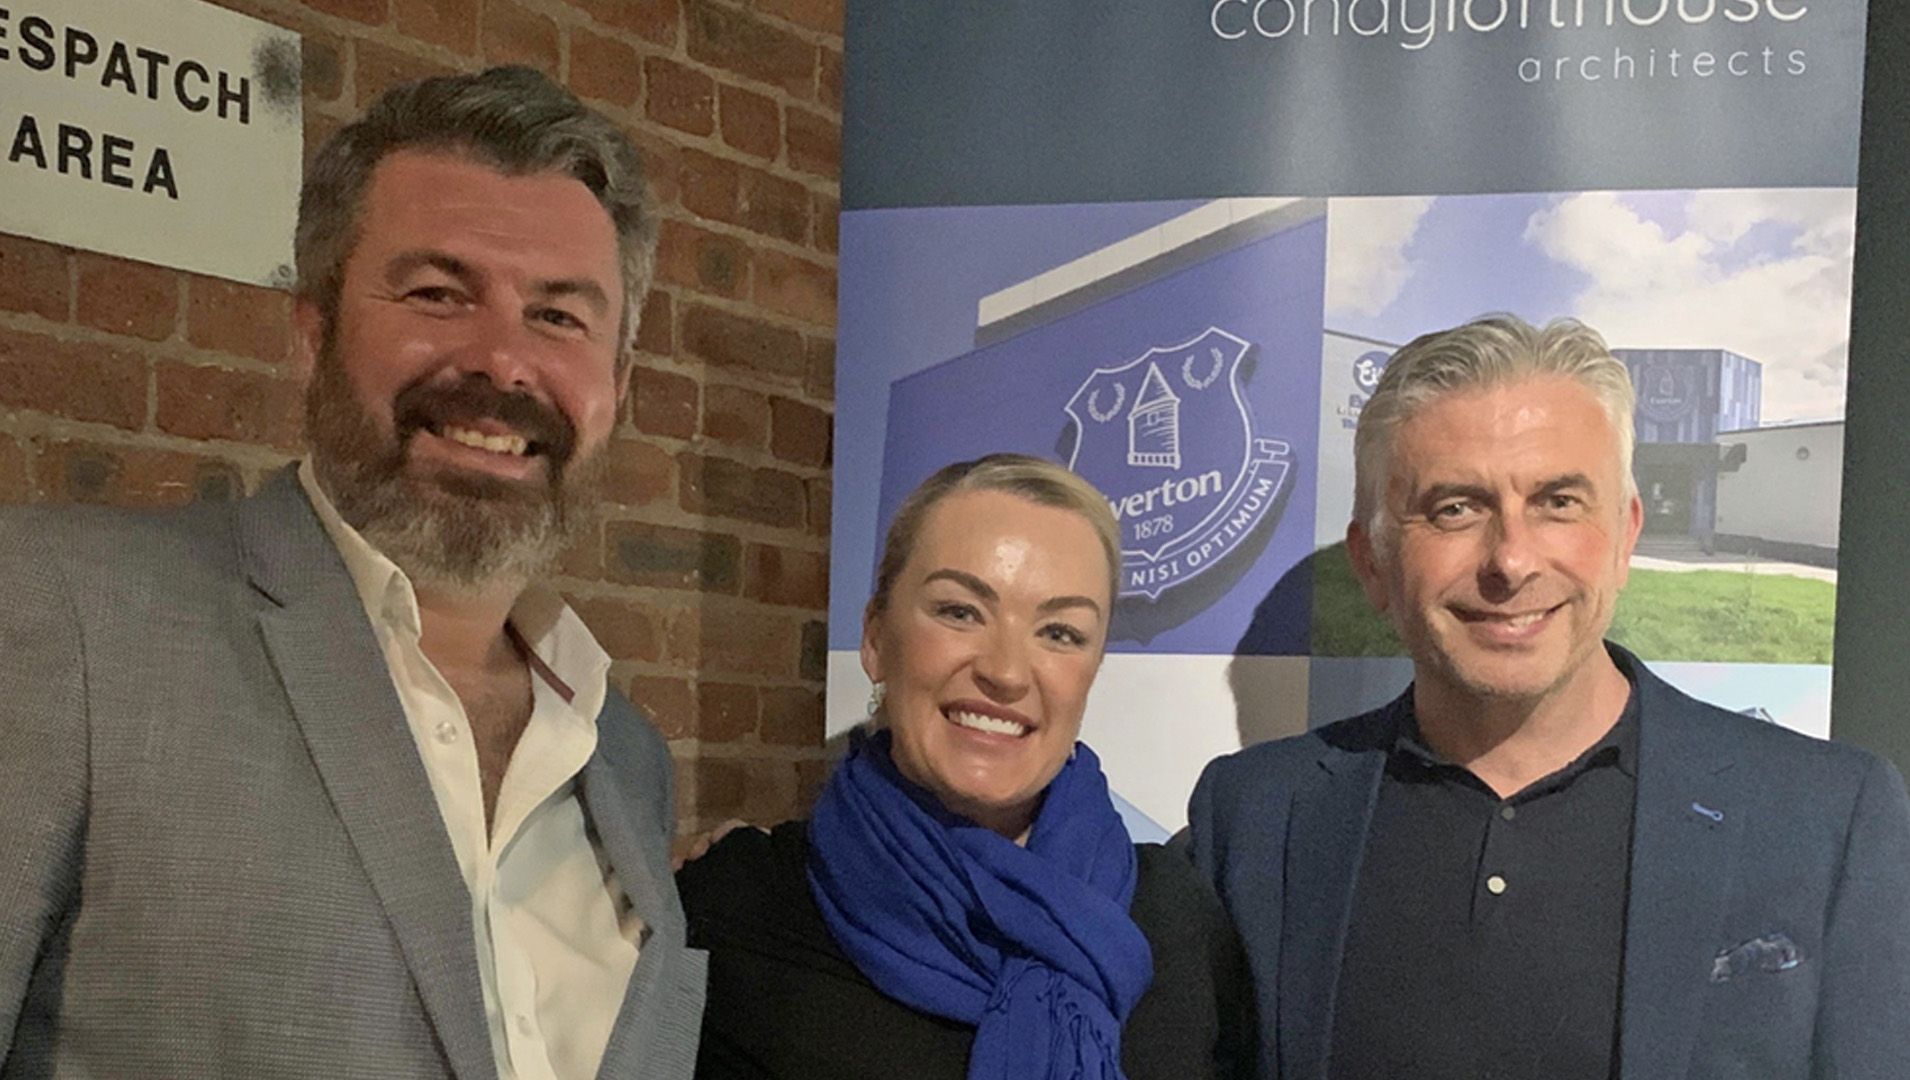 Condy Lofthouse Commits To COY Partnership